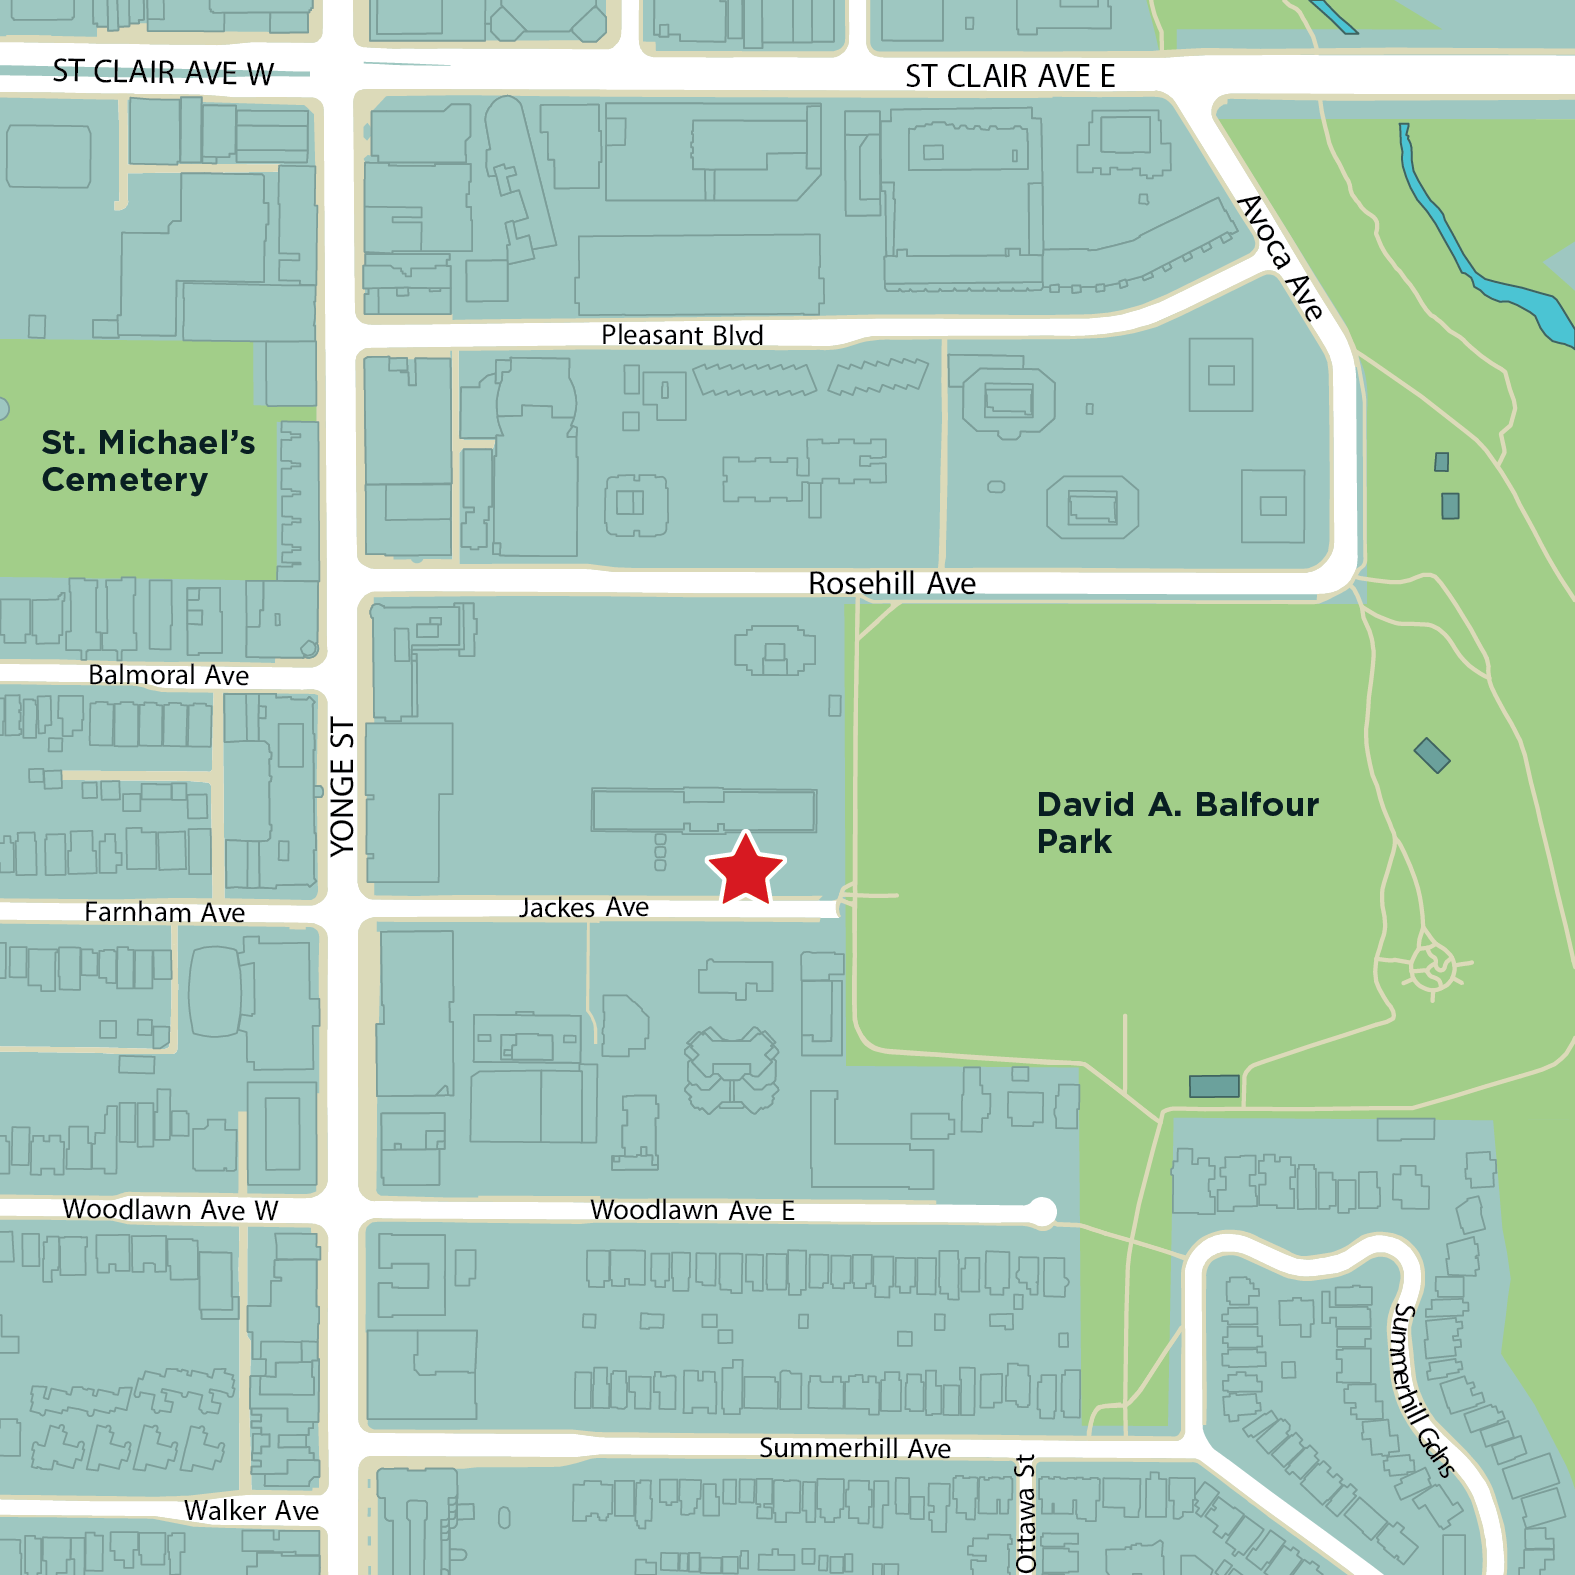 Aerial map image showing the placement of the new park on Jackes Avenue. The red star indicates where the new park will be located on Jackes Avenue, east of Yonge Street. 